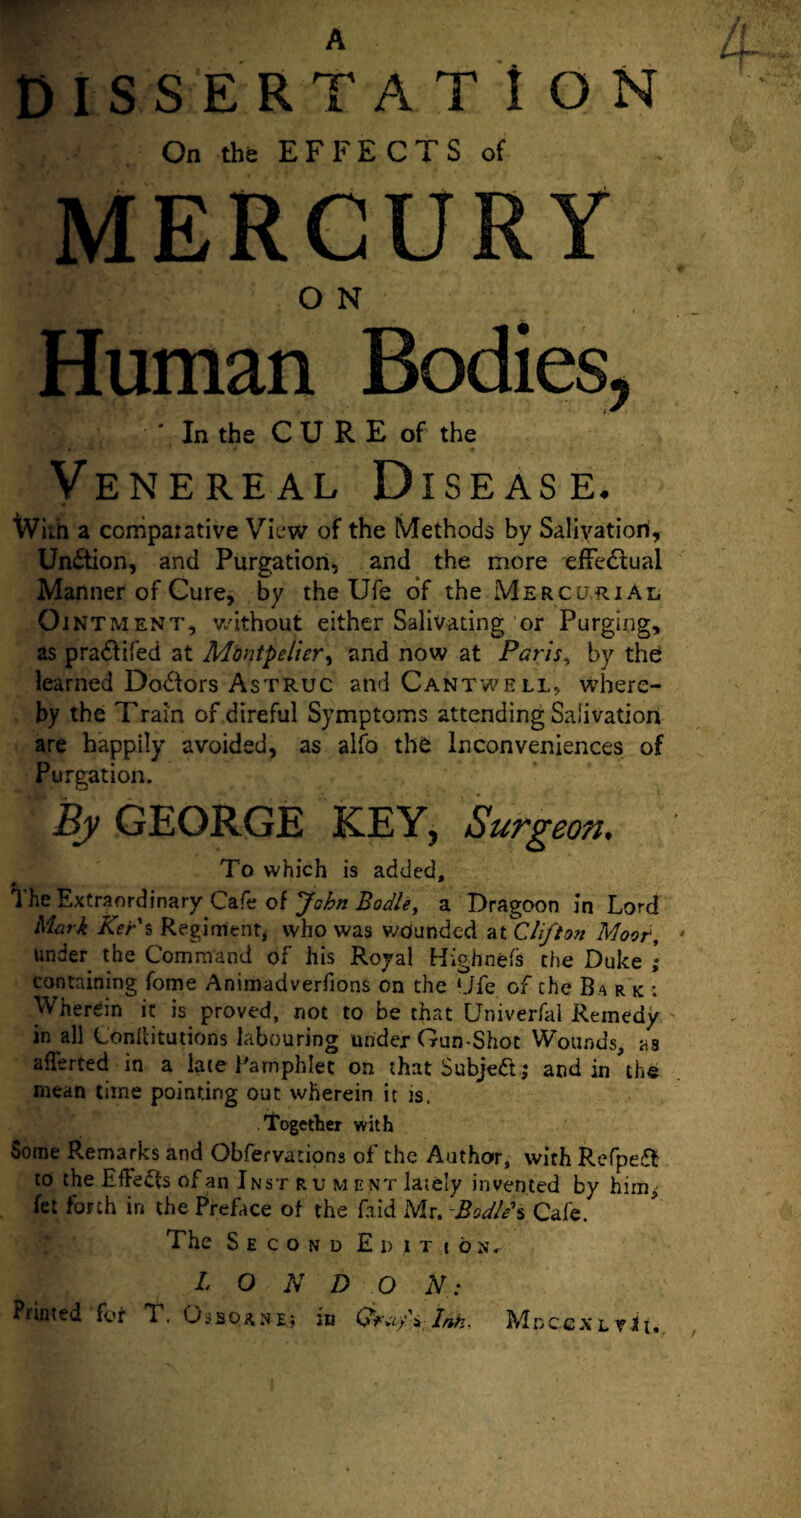 A DISSERTAT I ON On the EFFECTS of MERCURY ■ .. - O N Human Bodies, - In the CU RE of the Venereal Disease. Wim a comparative View of the Methods by Salivation, Un£tion, and Purgation, and the more effectual Manner of Cure, by the Ufe of the Mercurial Ointment, without either Salivating or Purging, as pra&ifed at Montpelier, and now at Paris, by the learned Do&ors Astruc and Cantwell, where¬ by the Train of direful Symptoms attending Salivation are happily avoided, as alfo the Inconveniences of Purgation. By GEORGE KEY, Surgeon. To which is added. The Extraordinary Cafe of John Bodle, a Dragoon in Lord Mark Ker s Regiment, who was wounded at Clifton Moor, under the Command of his Royal Highnefs the Duke ; containing fome Animadverfions on the *Jfe of the Ba r k : Wherein it is proved, not to be that Univerfal Remedy in all Conilitutions labouring under Gun-Shot Wounds, as afferted in a late Pamphlet on that Subject; and in the mean time pointing out wherein it is. Together with Some Remarks and Obfervations of the Author, with Refpeffc to the Effects of an Inst ru went lately invented by him, fet forth in the Preface of the faid Mr. Bodied Cafe. The Second Edition. I O N D O N: Piinted {ot T. Ossorne; in Ink. MdccxlvJi*